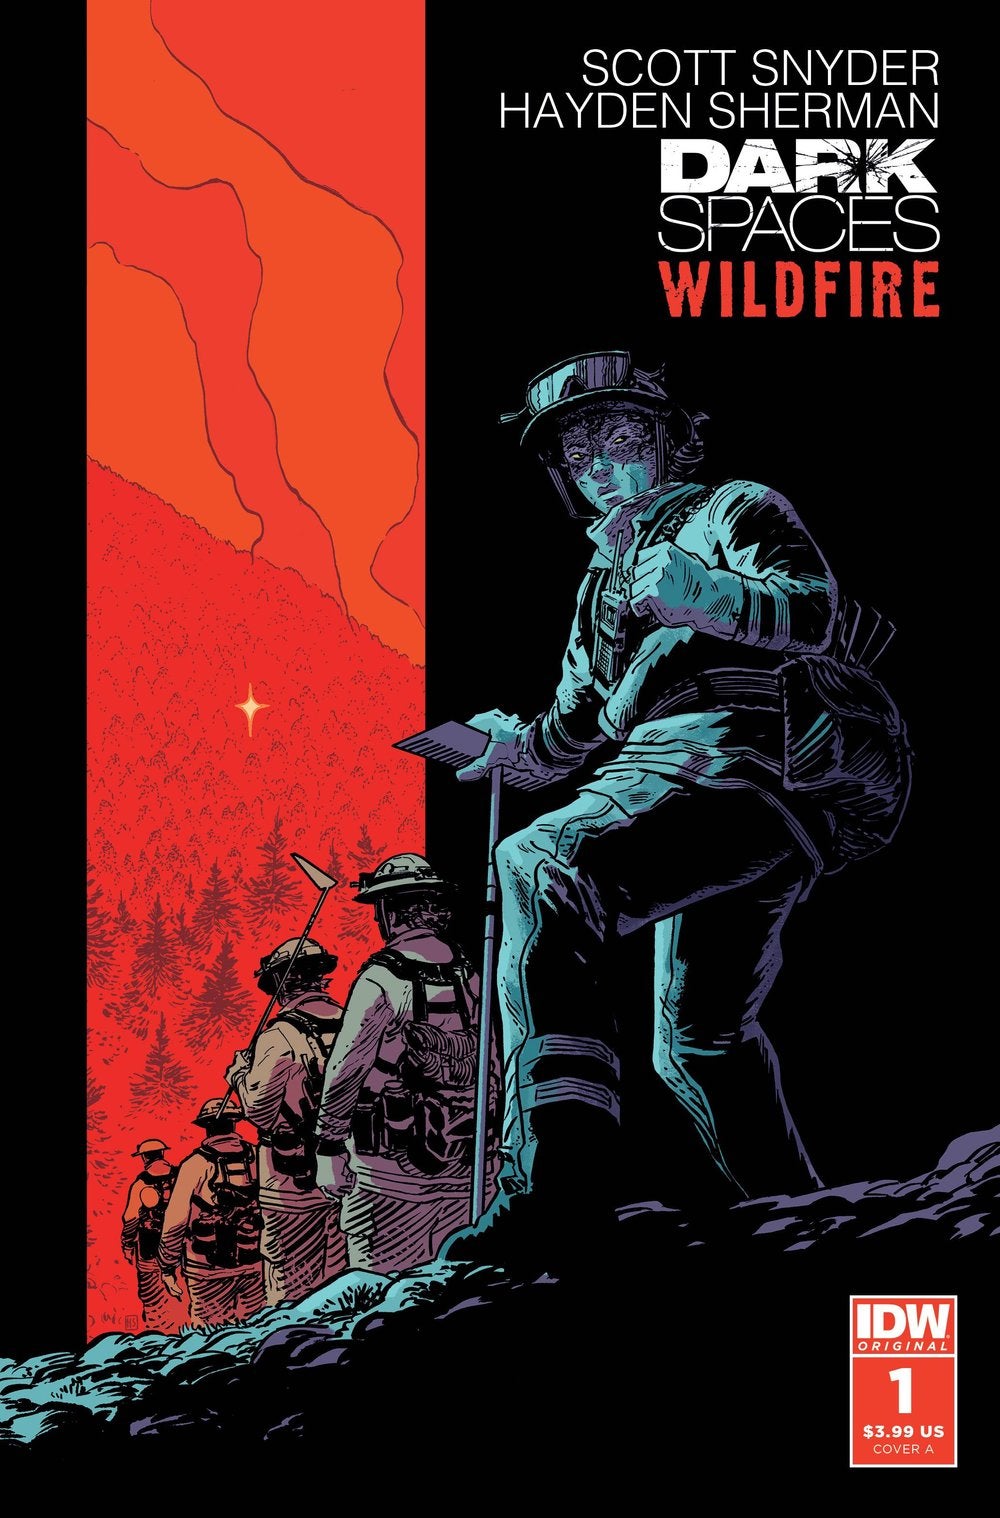 A line of firefighters. Dark Spaces Wildfire #1 cover by Hayden Sherman